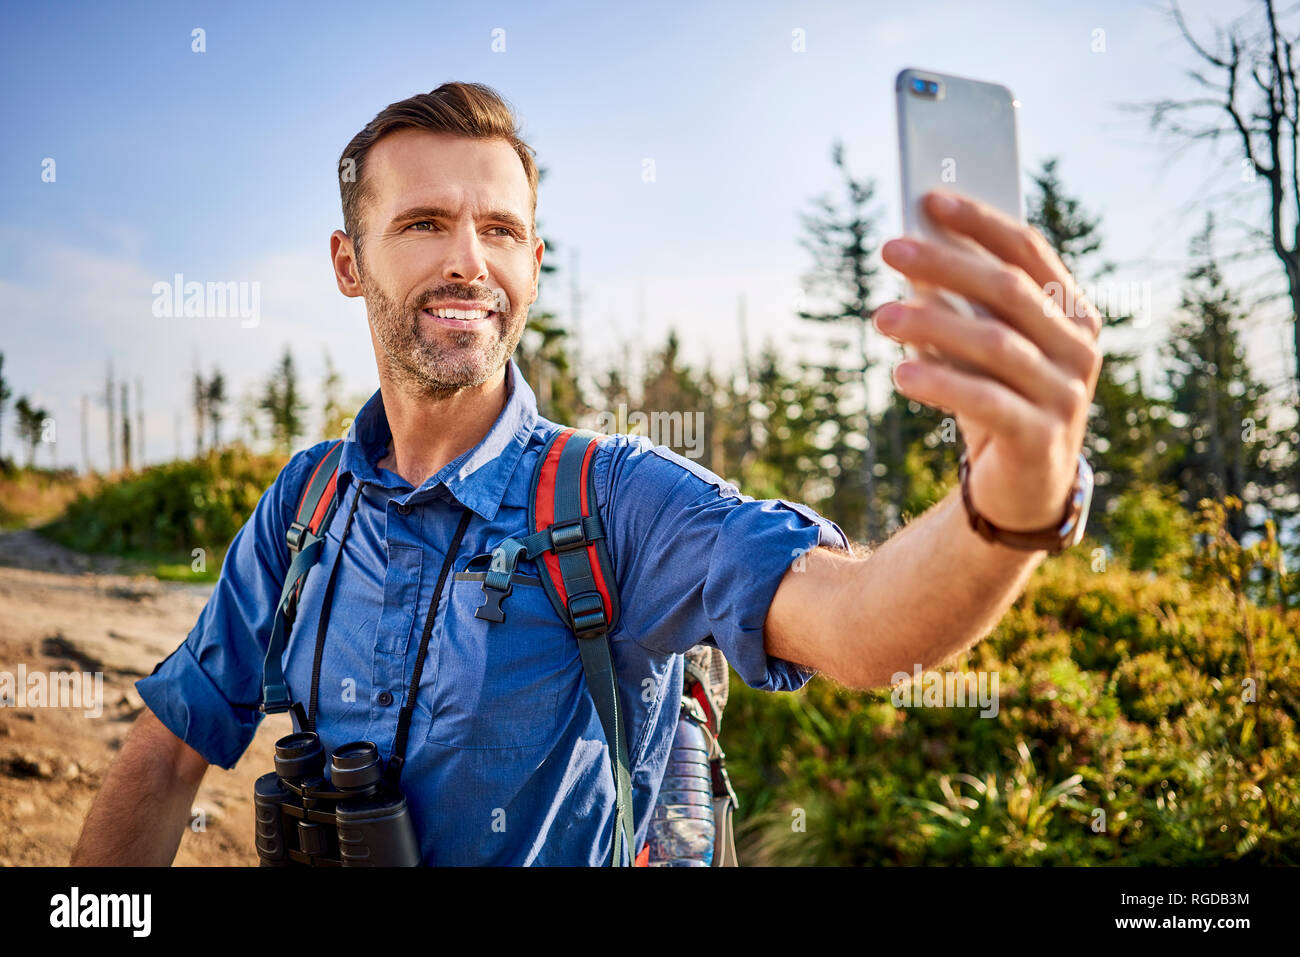 Man taking a selfie with his cell phone during hiking trip in the mountains Stock Photo